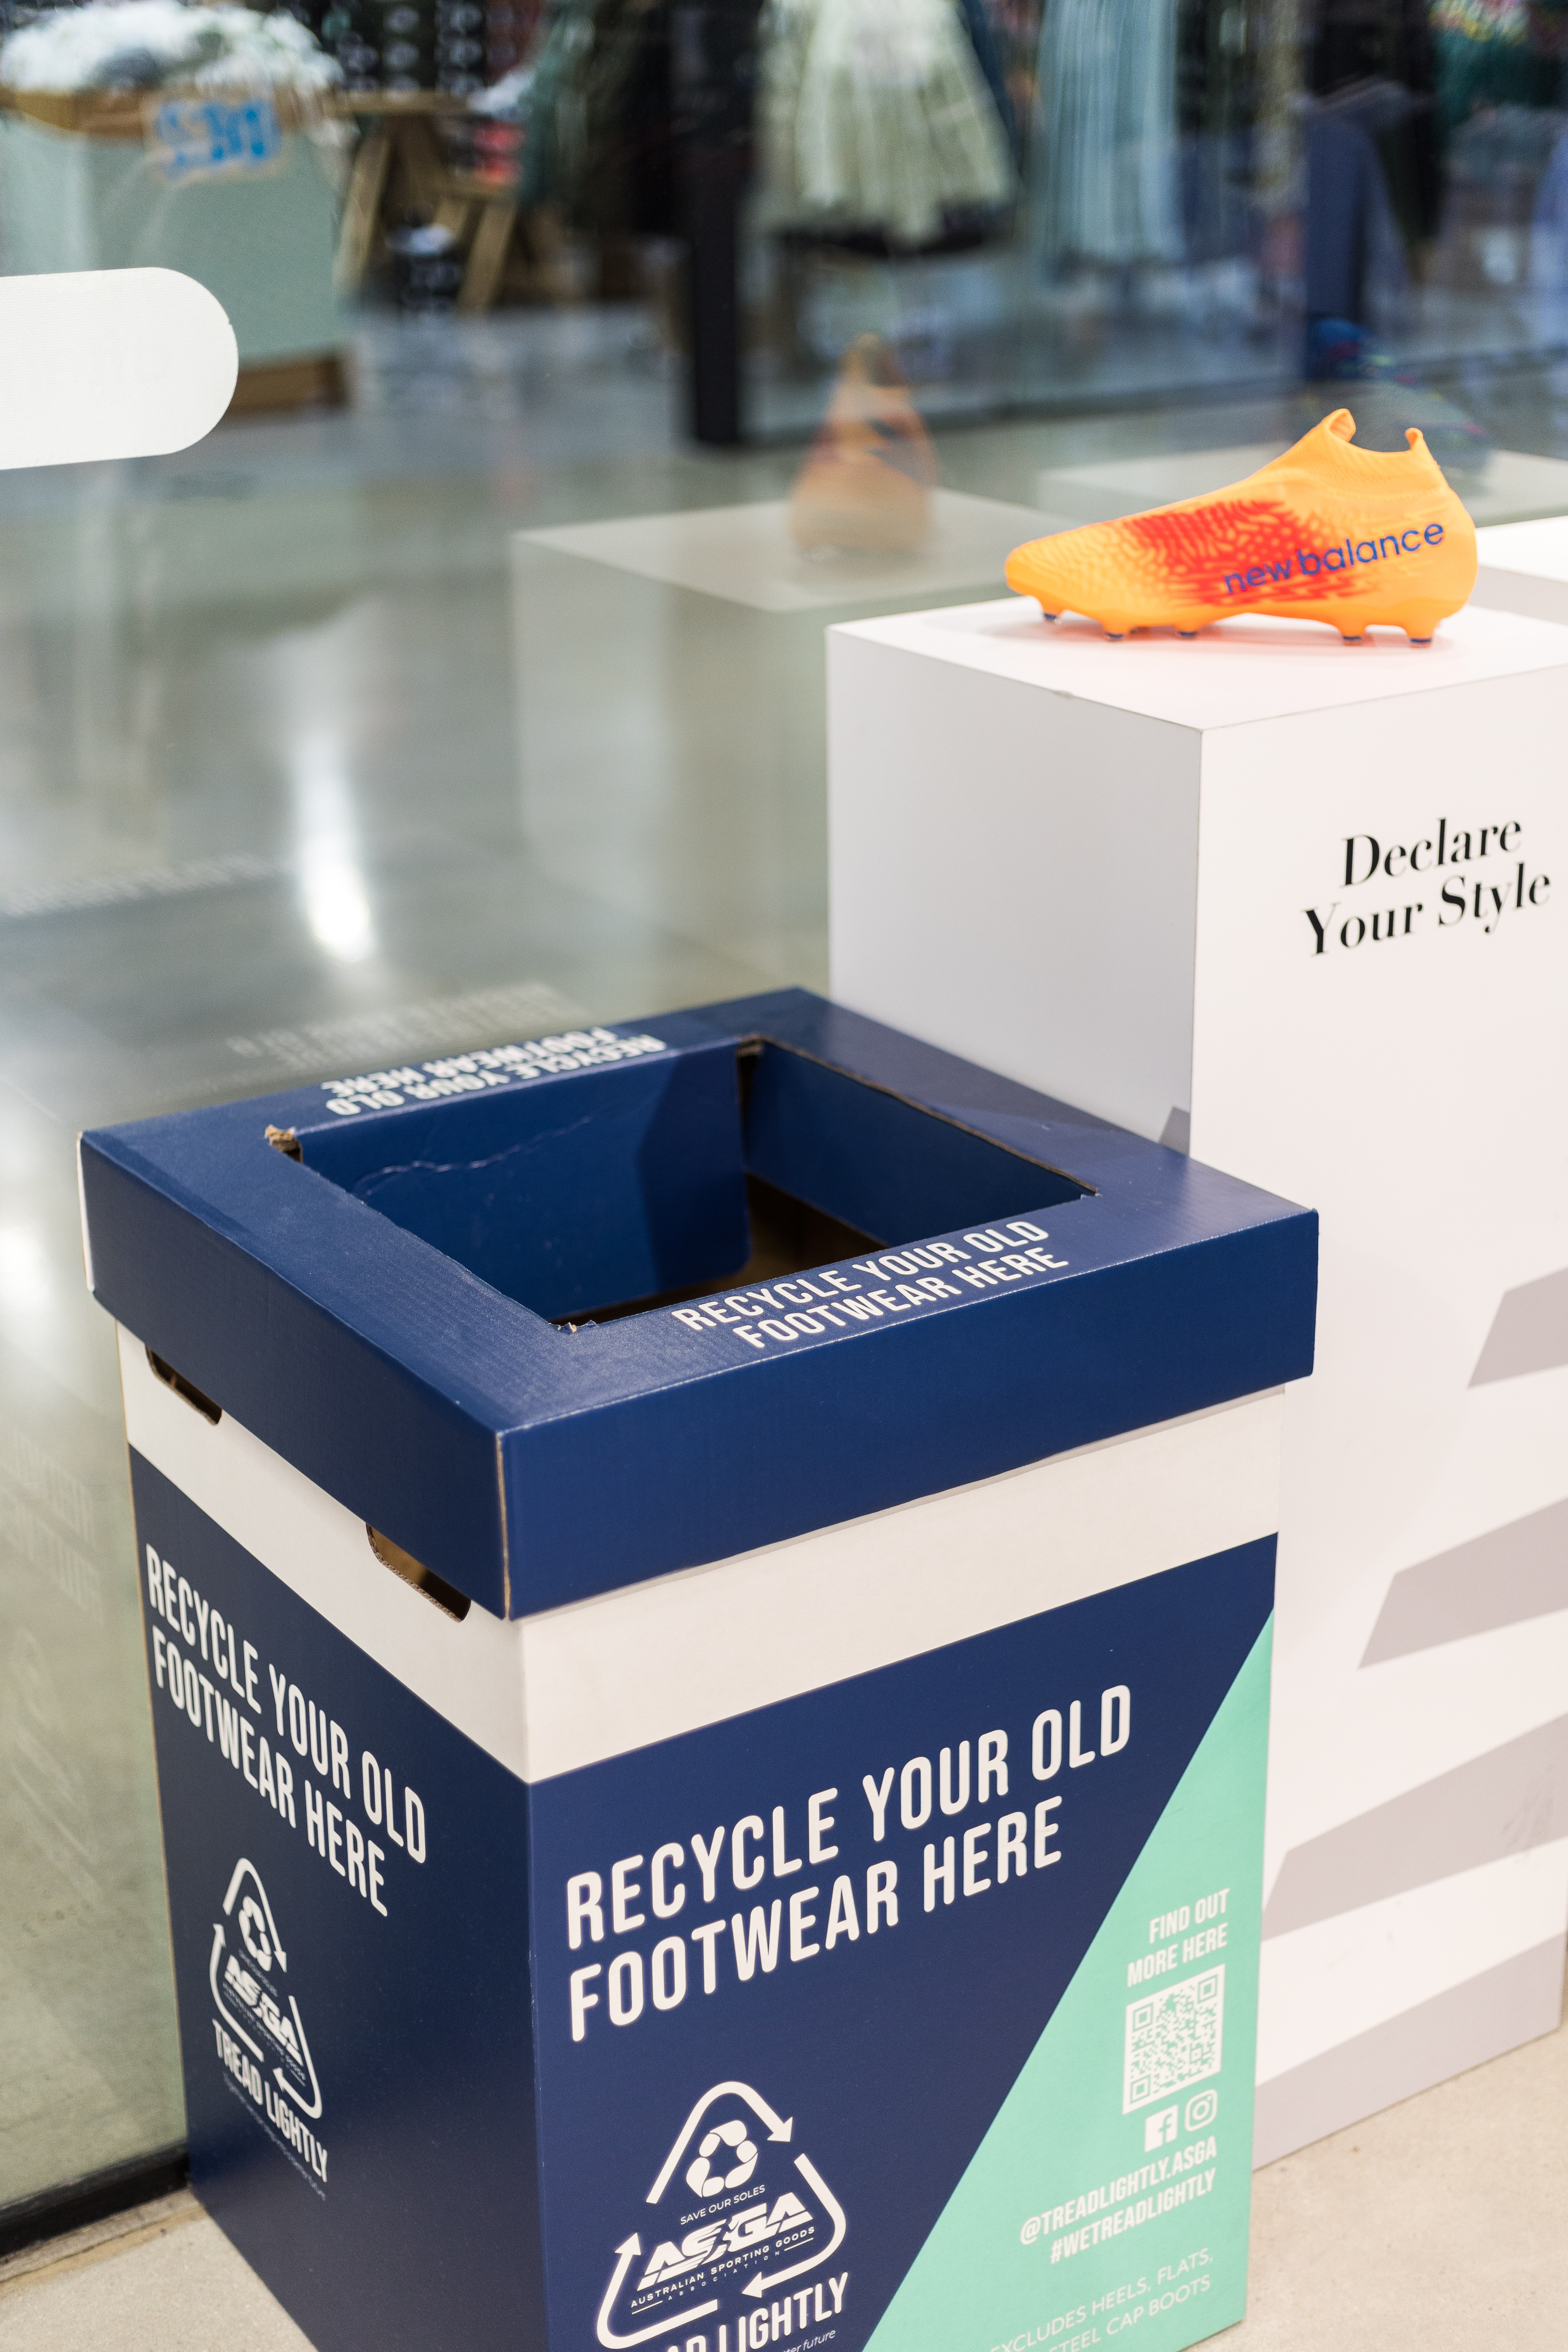 Stad bloem Behoort Gangster Recycle your old shoes at Canberra Outlet! - Canberra Outlet